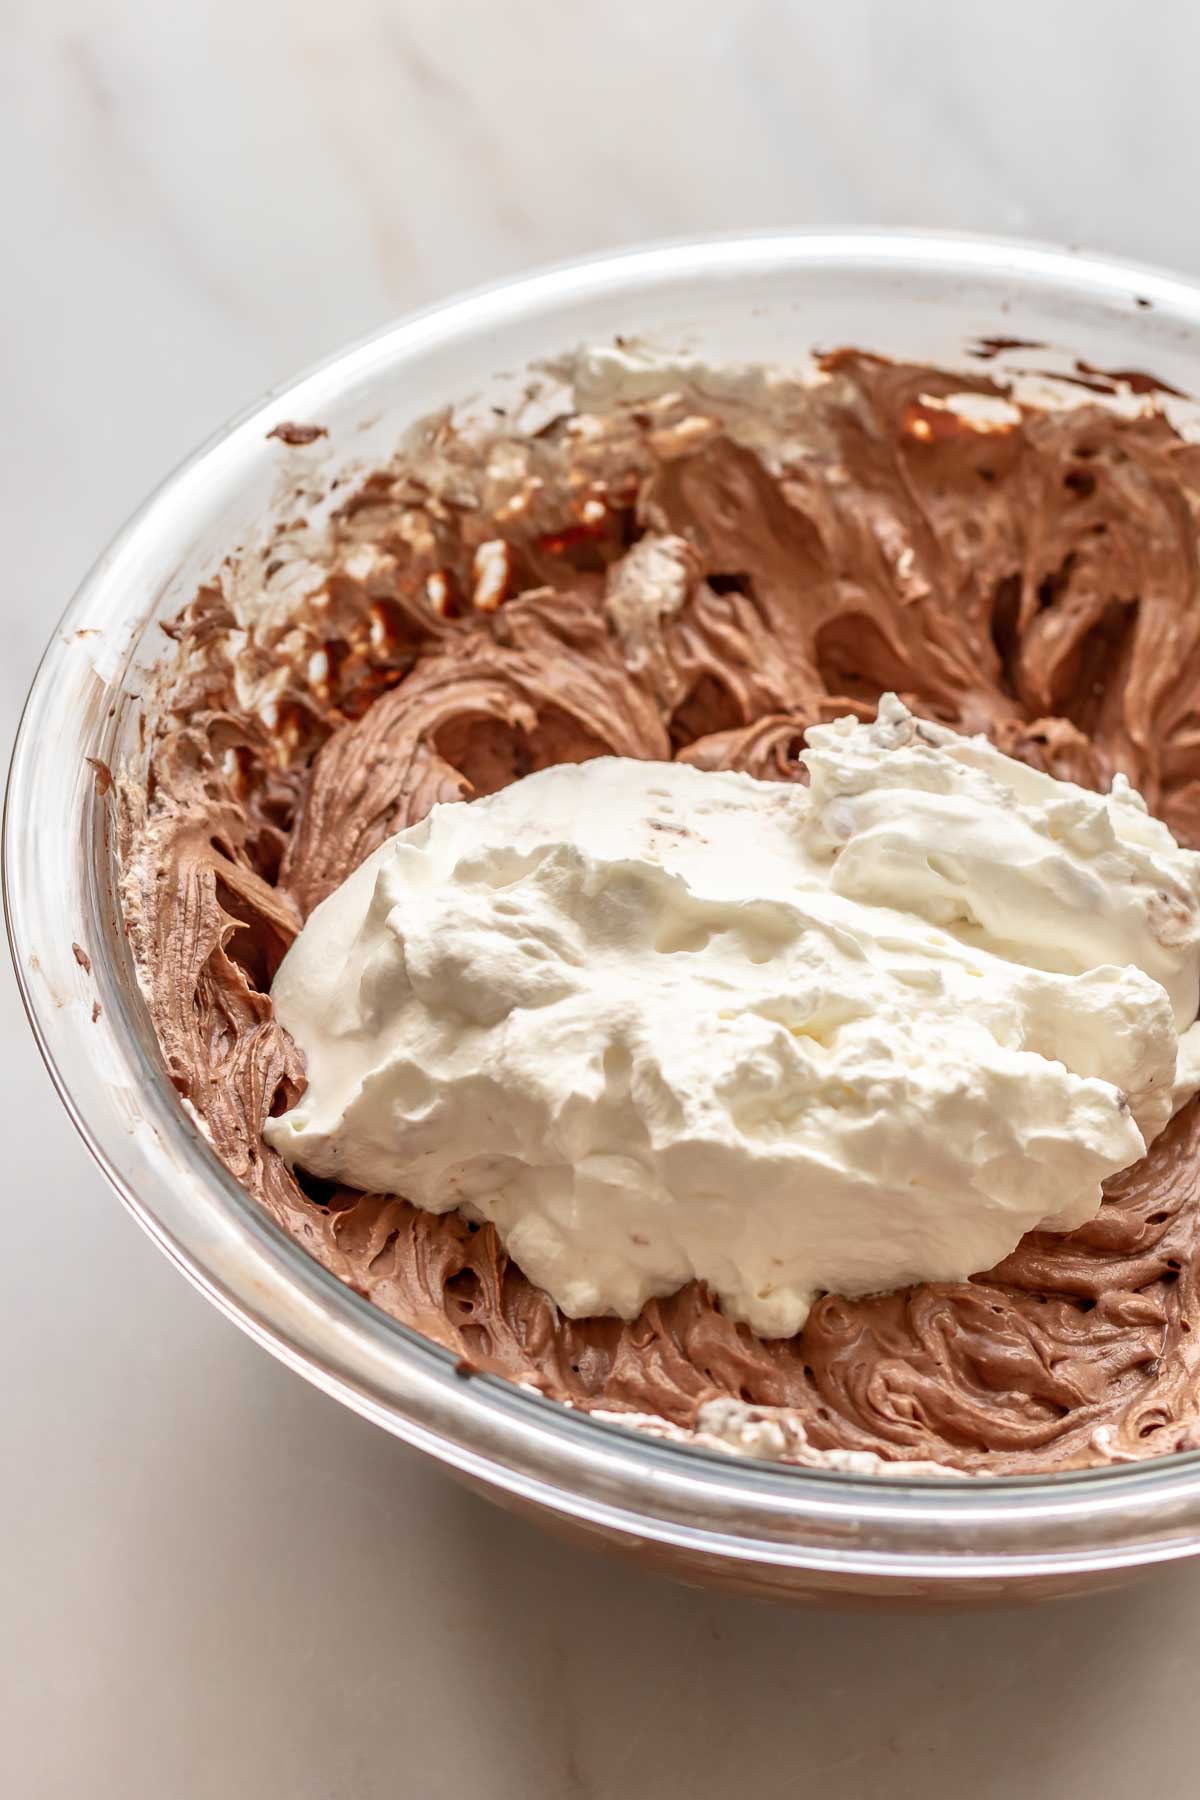 Whipped cream on top of chocolate cheesecake batter.